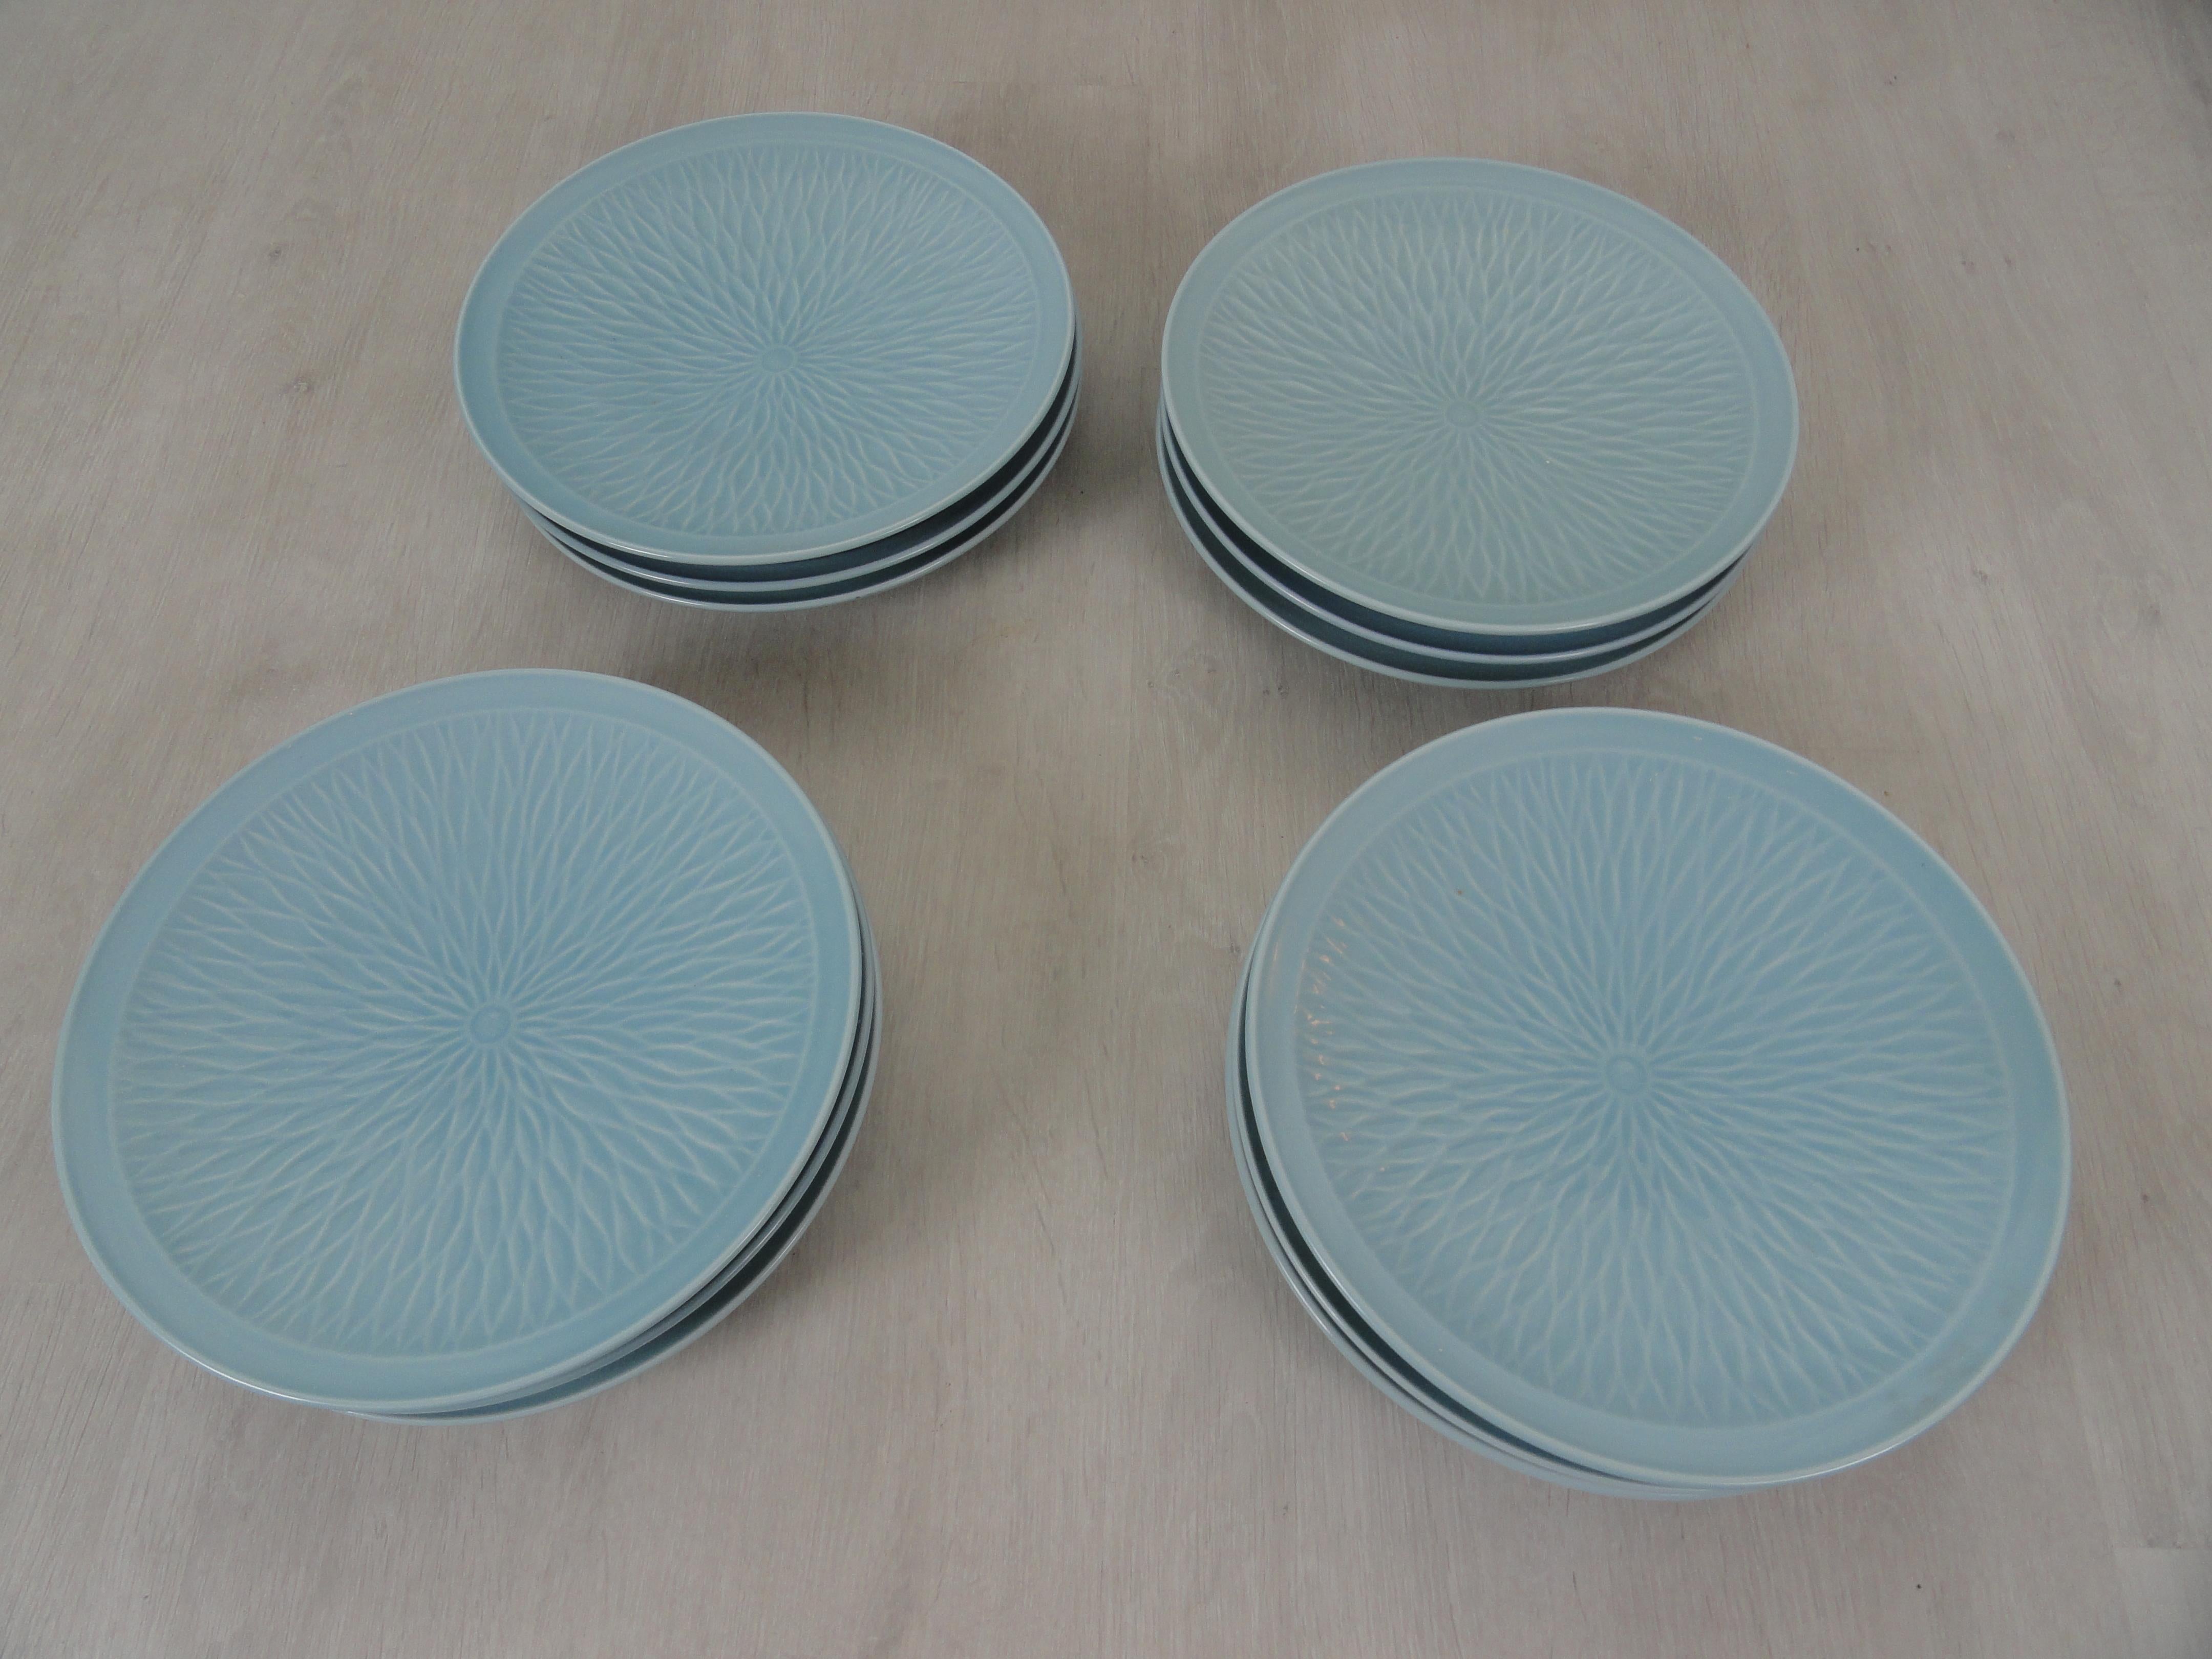 Large-scale chrysanthemum patterned Clare De Loon chargers. Japanese. Sold in sets of 2.